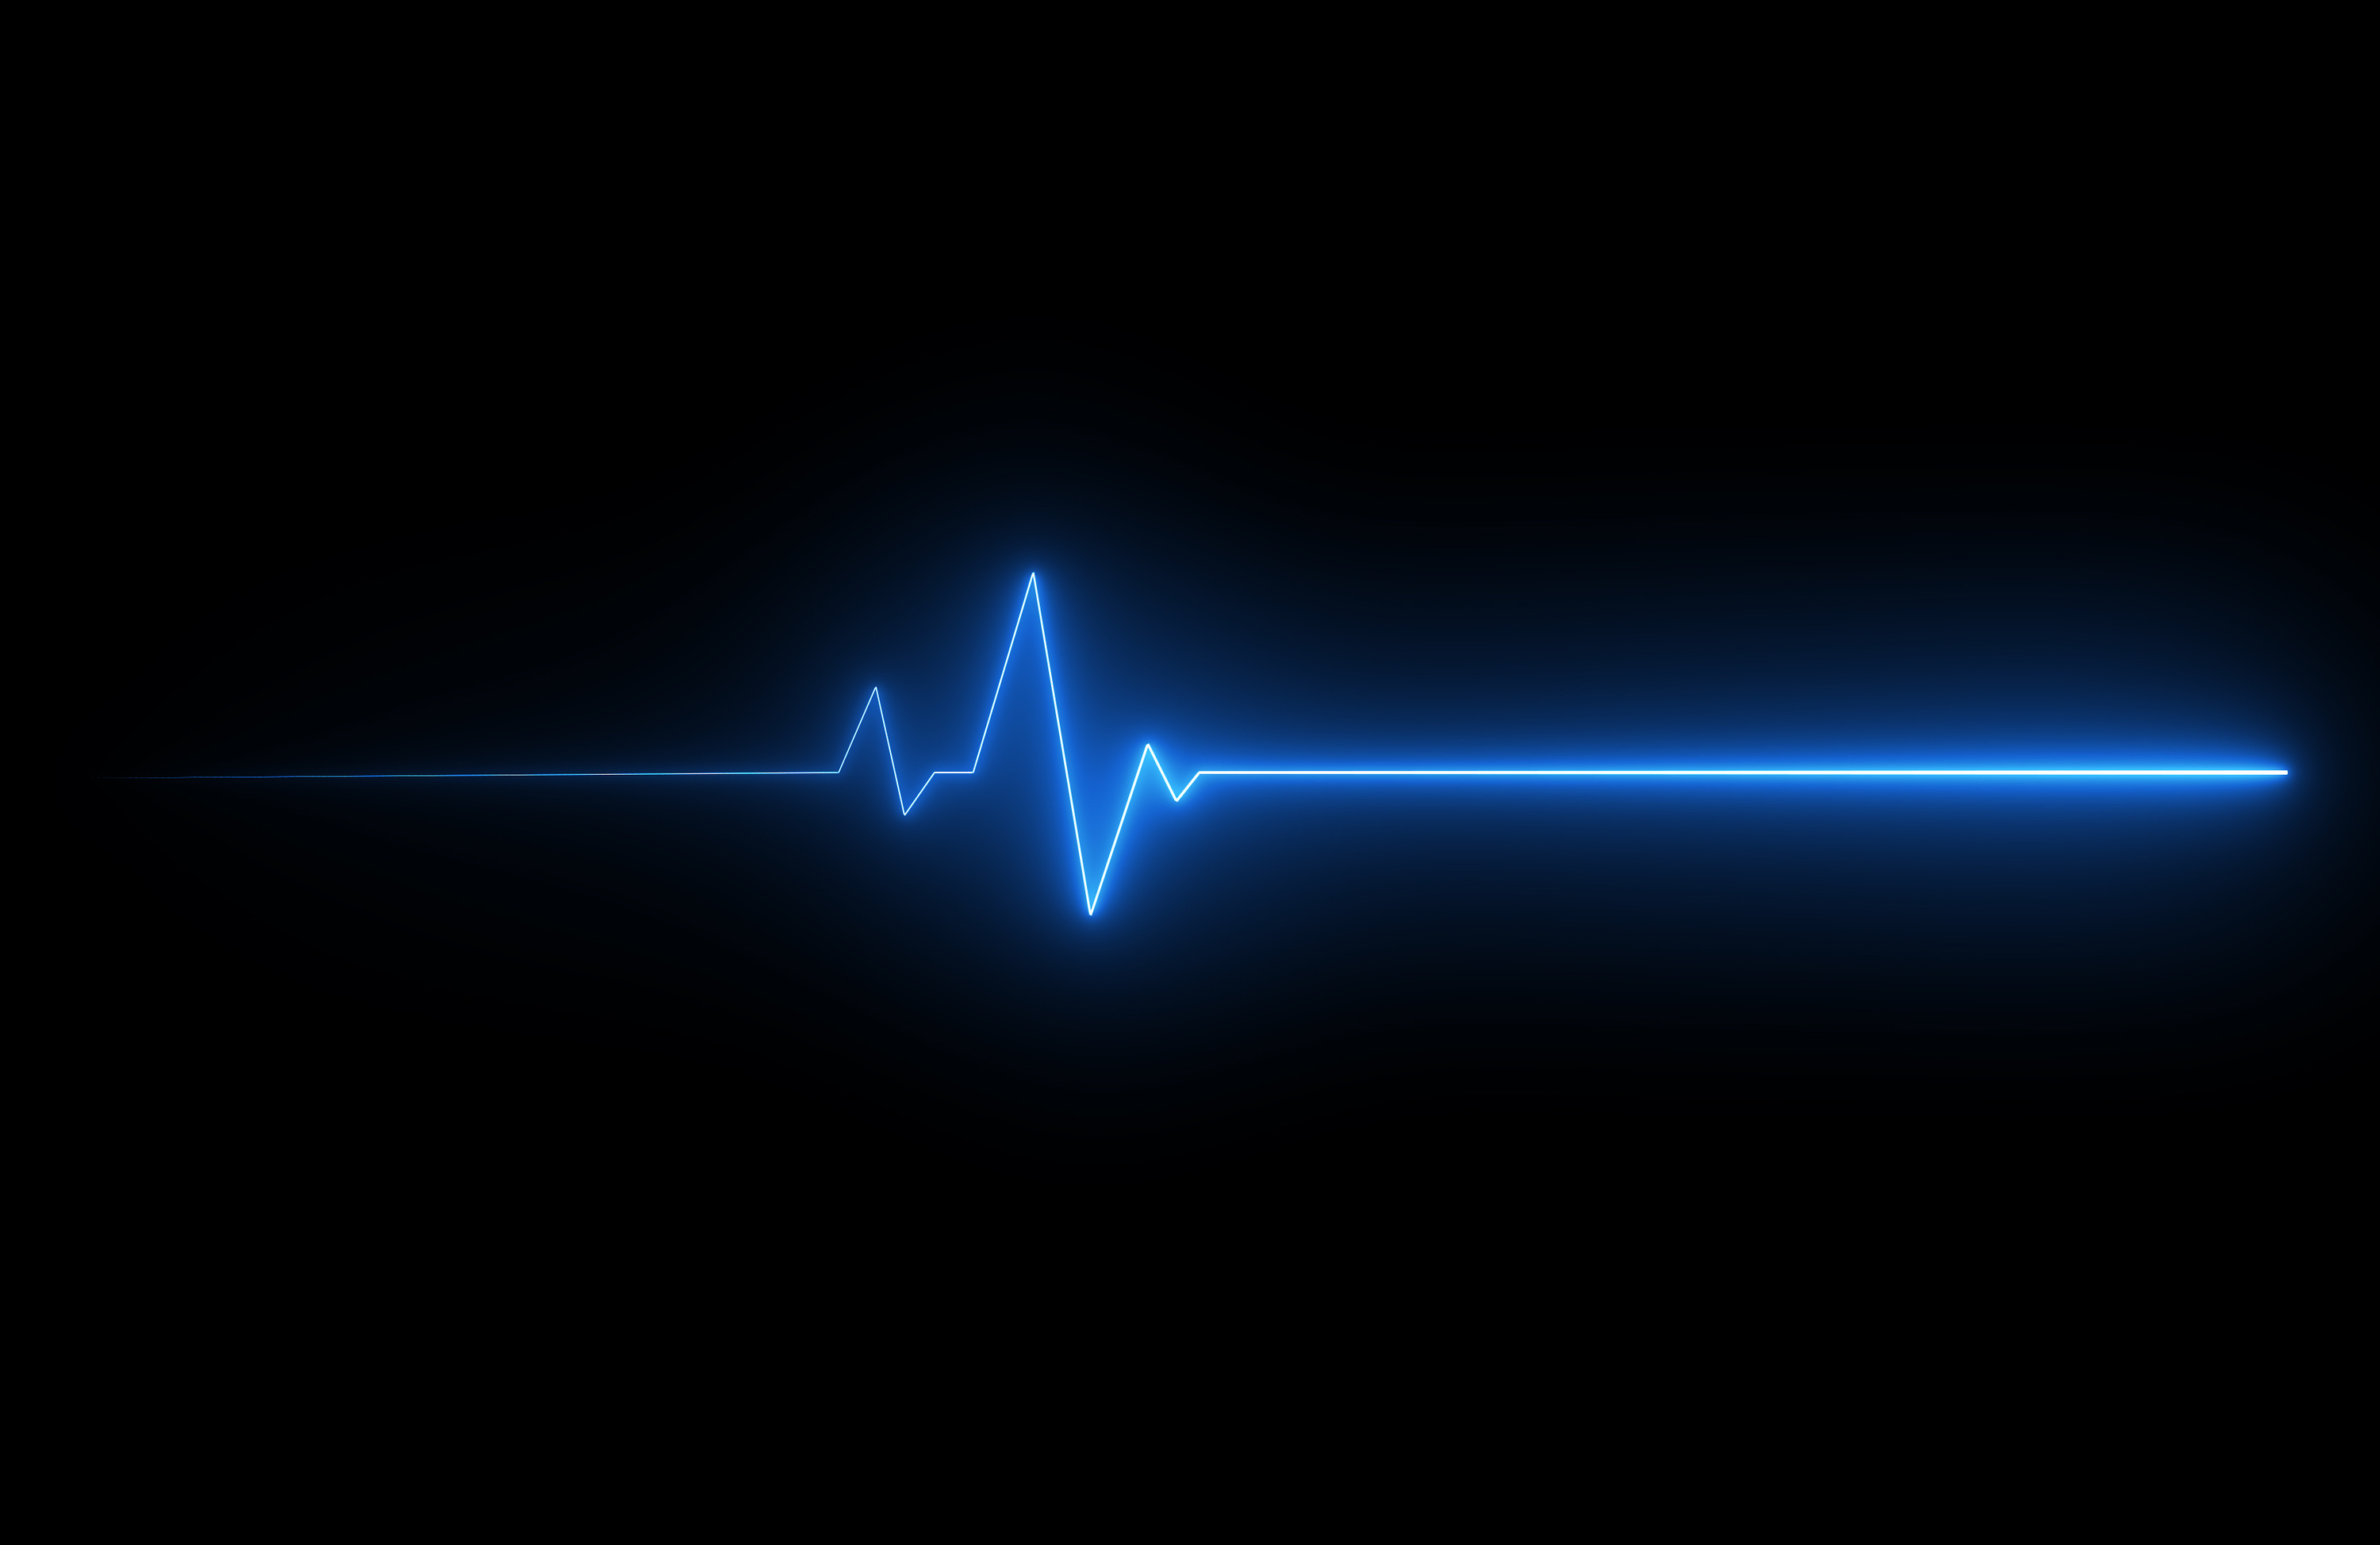 Heartbeat, Patient and doctor concerns, Tracking technology, Privacy issues, 3000x1950 HD Desktop